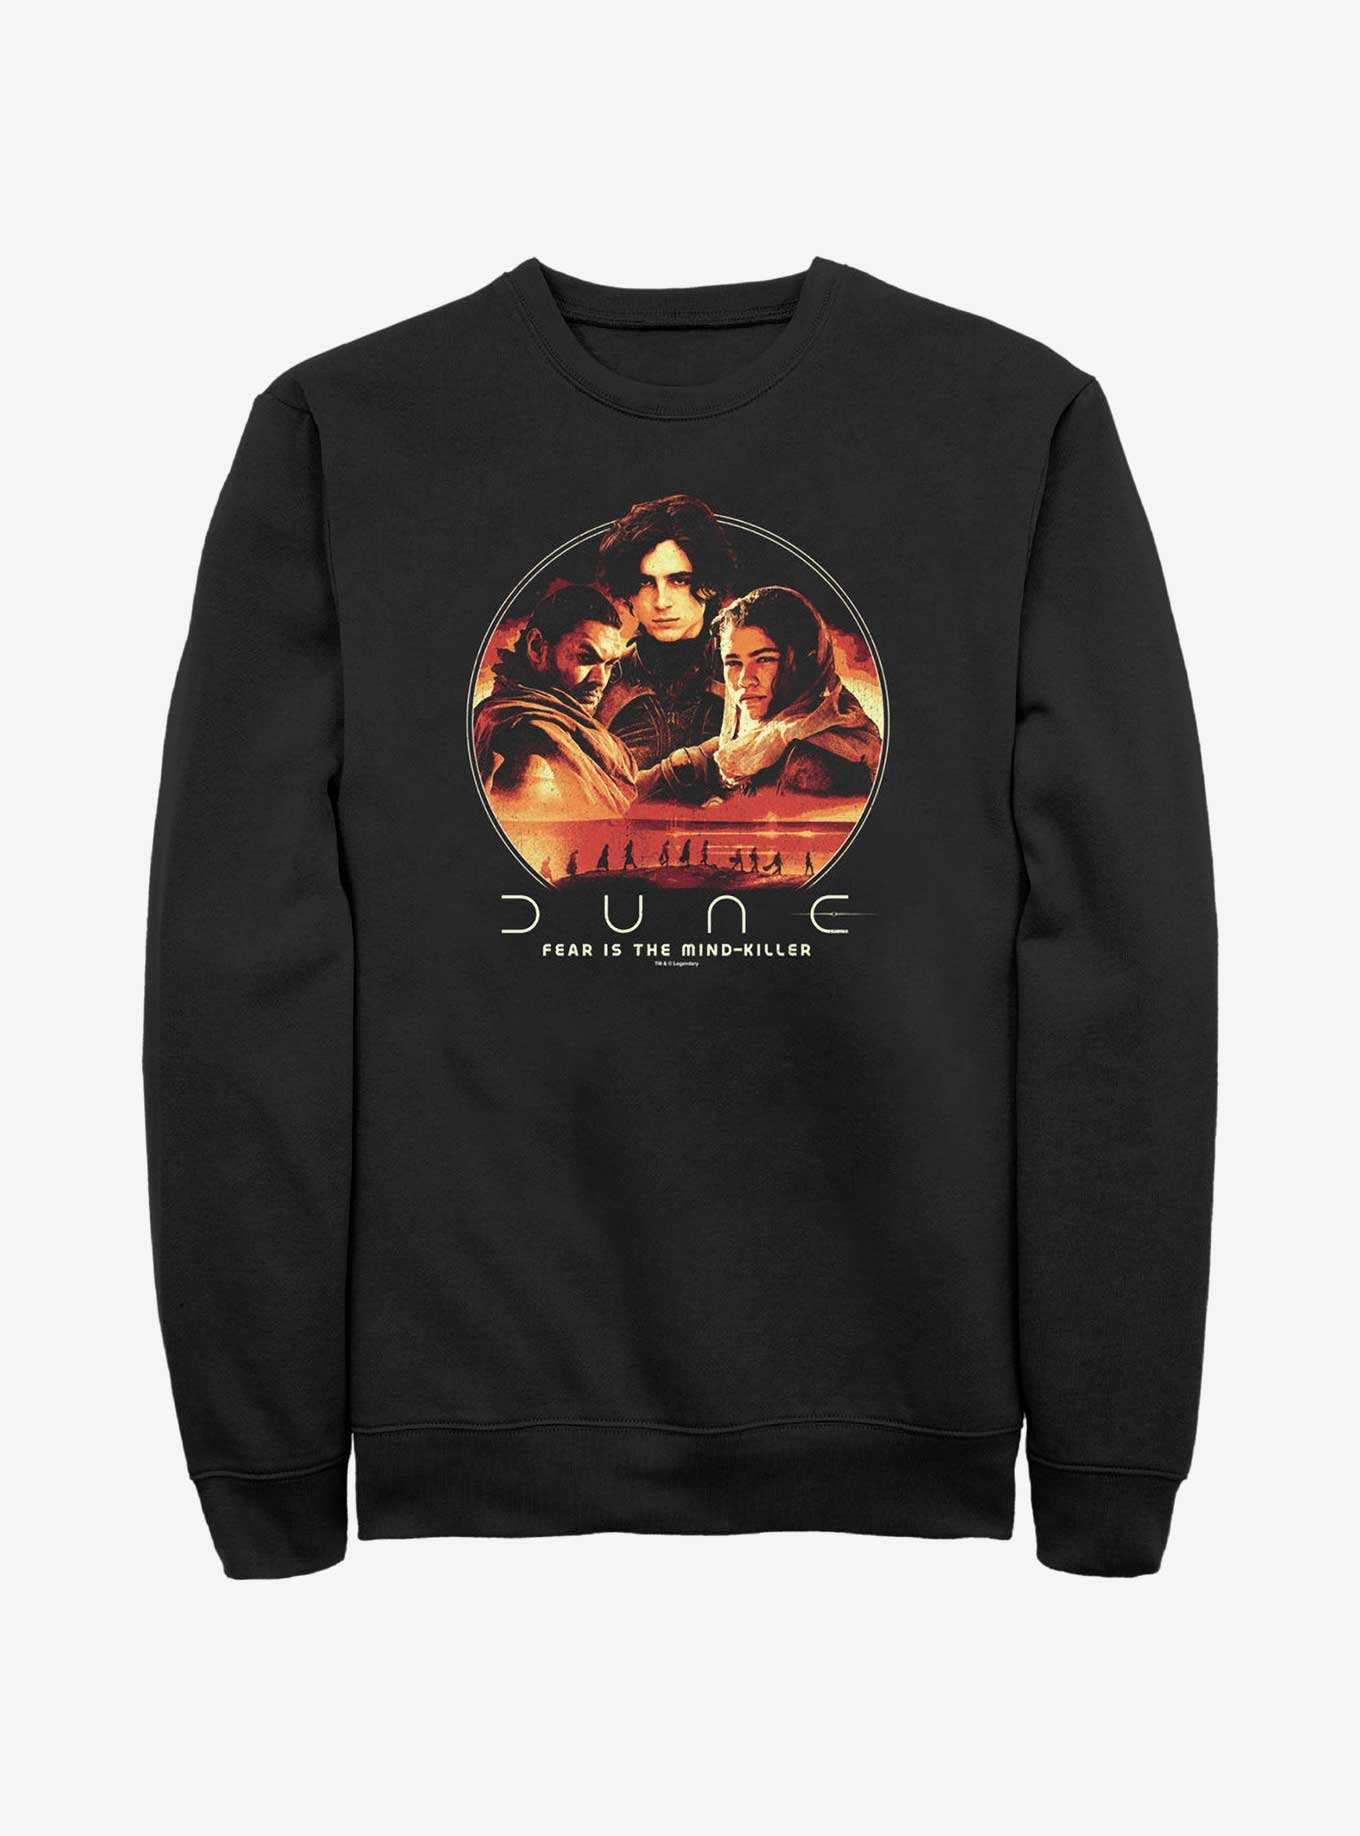 Dune: Part Two Characters Circle Icon Sweatshirt, , hi-res